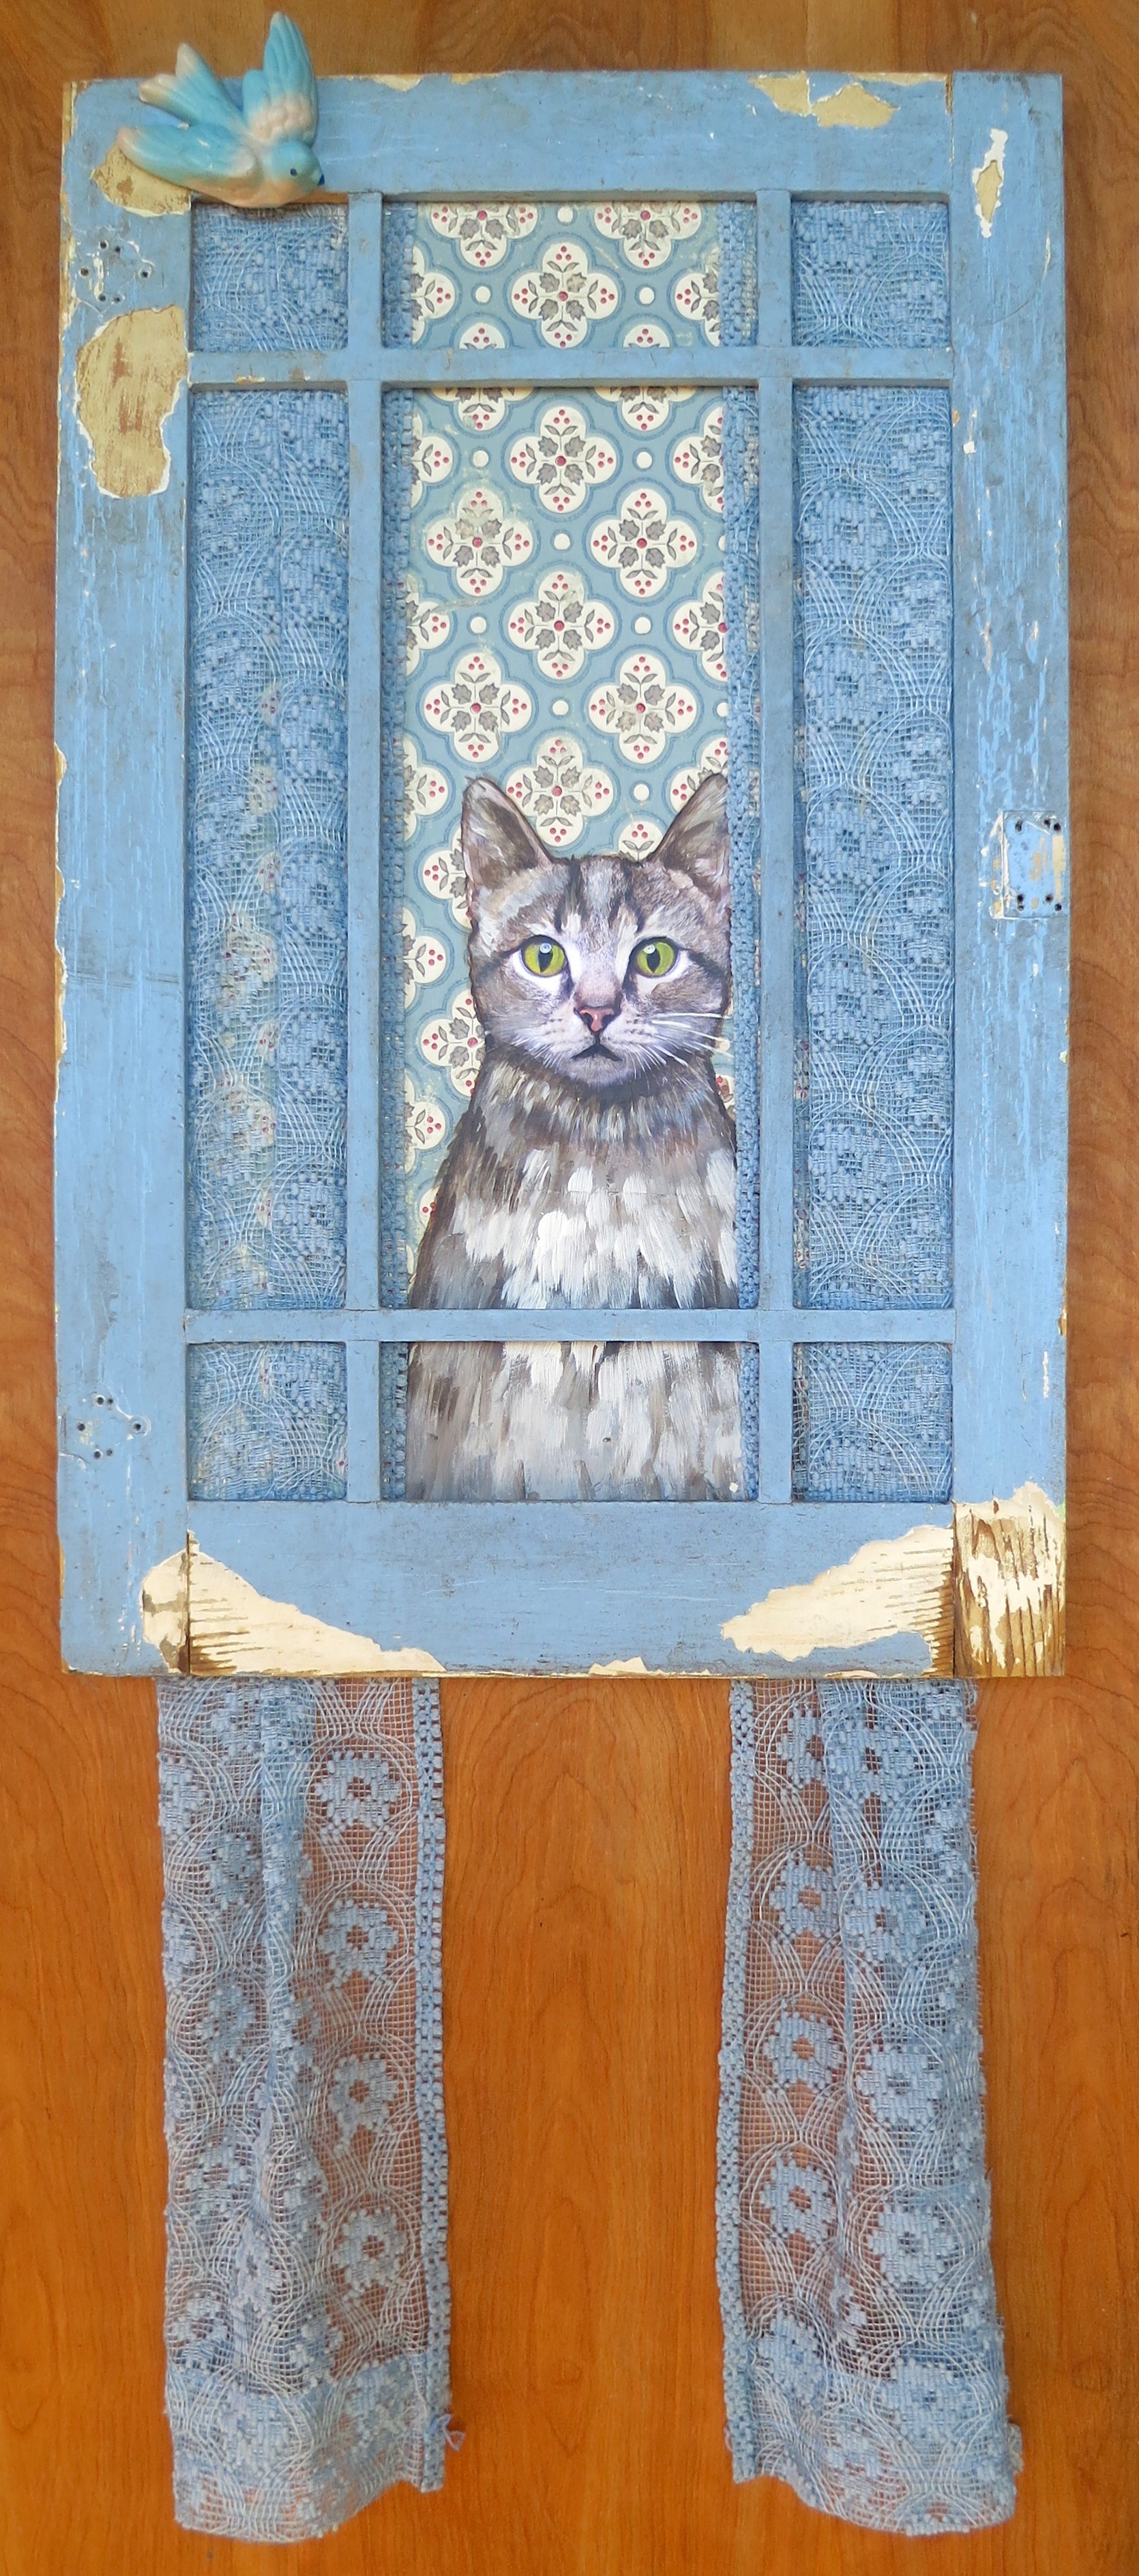 Sheba Standing Guard 18x45 Collage on wood panel